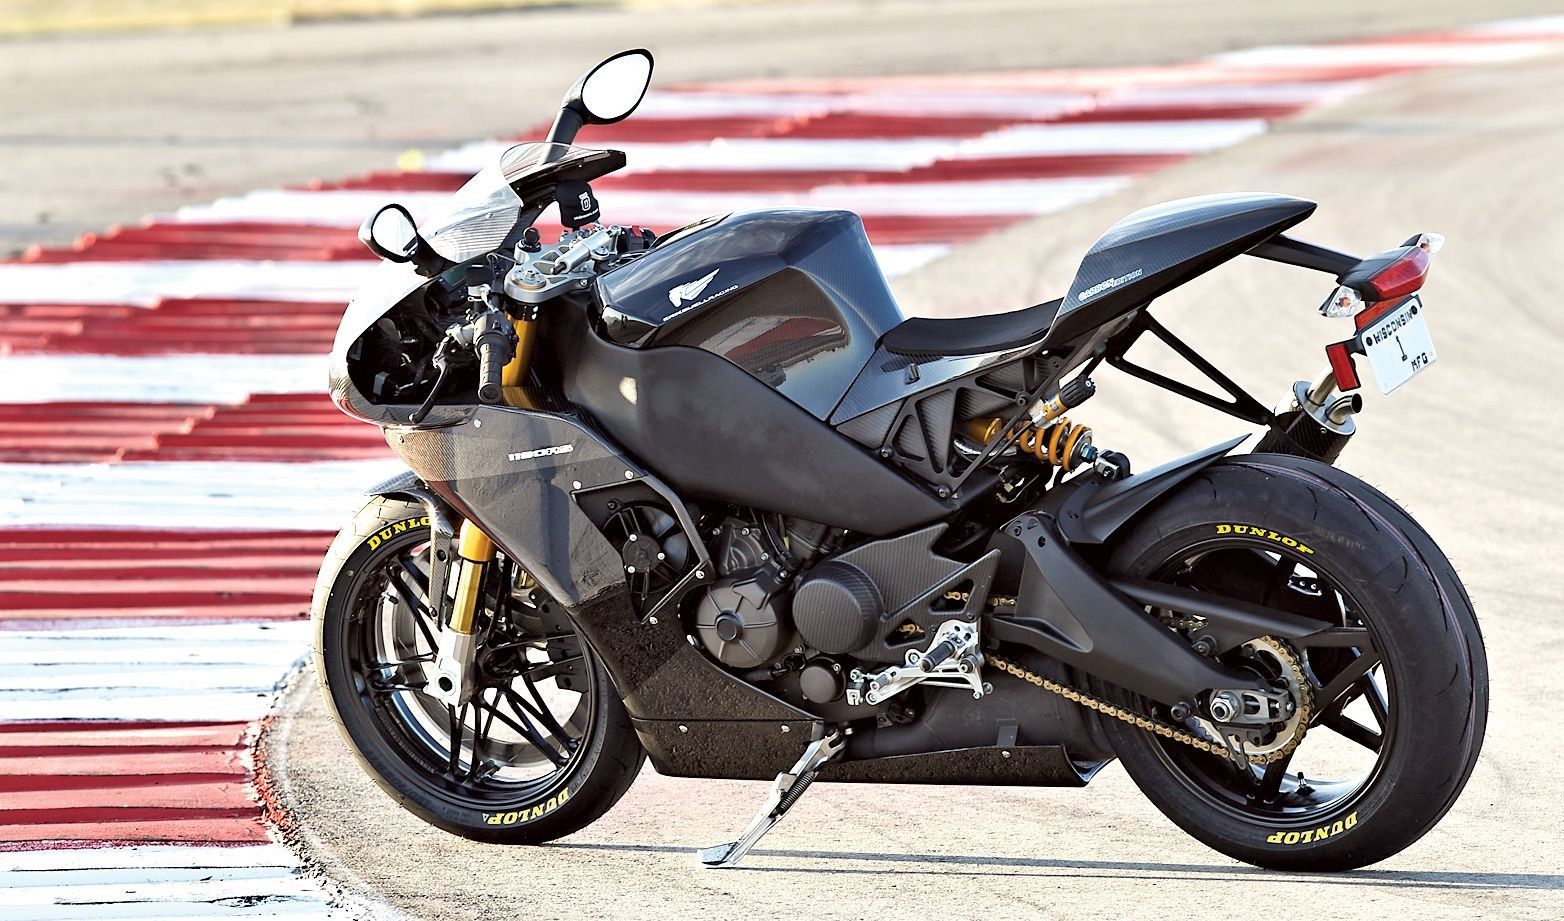 Erik Buell Racing 1190RS bike parked at the race track